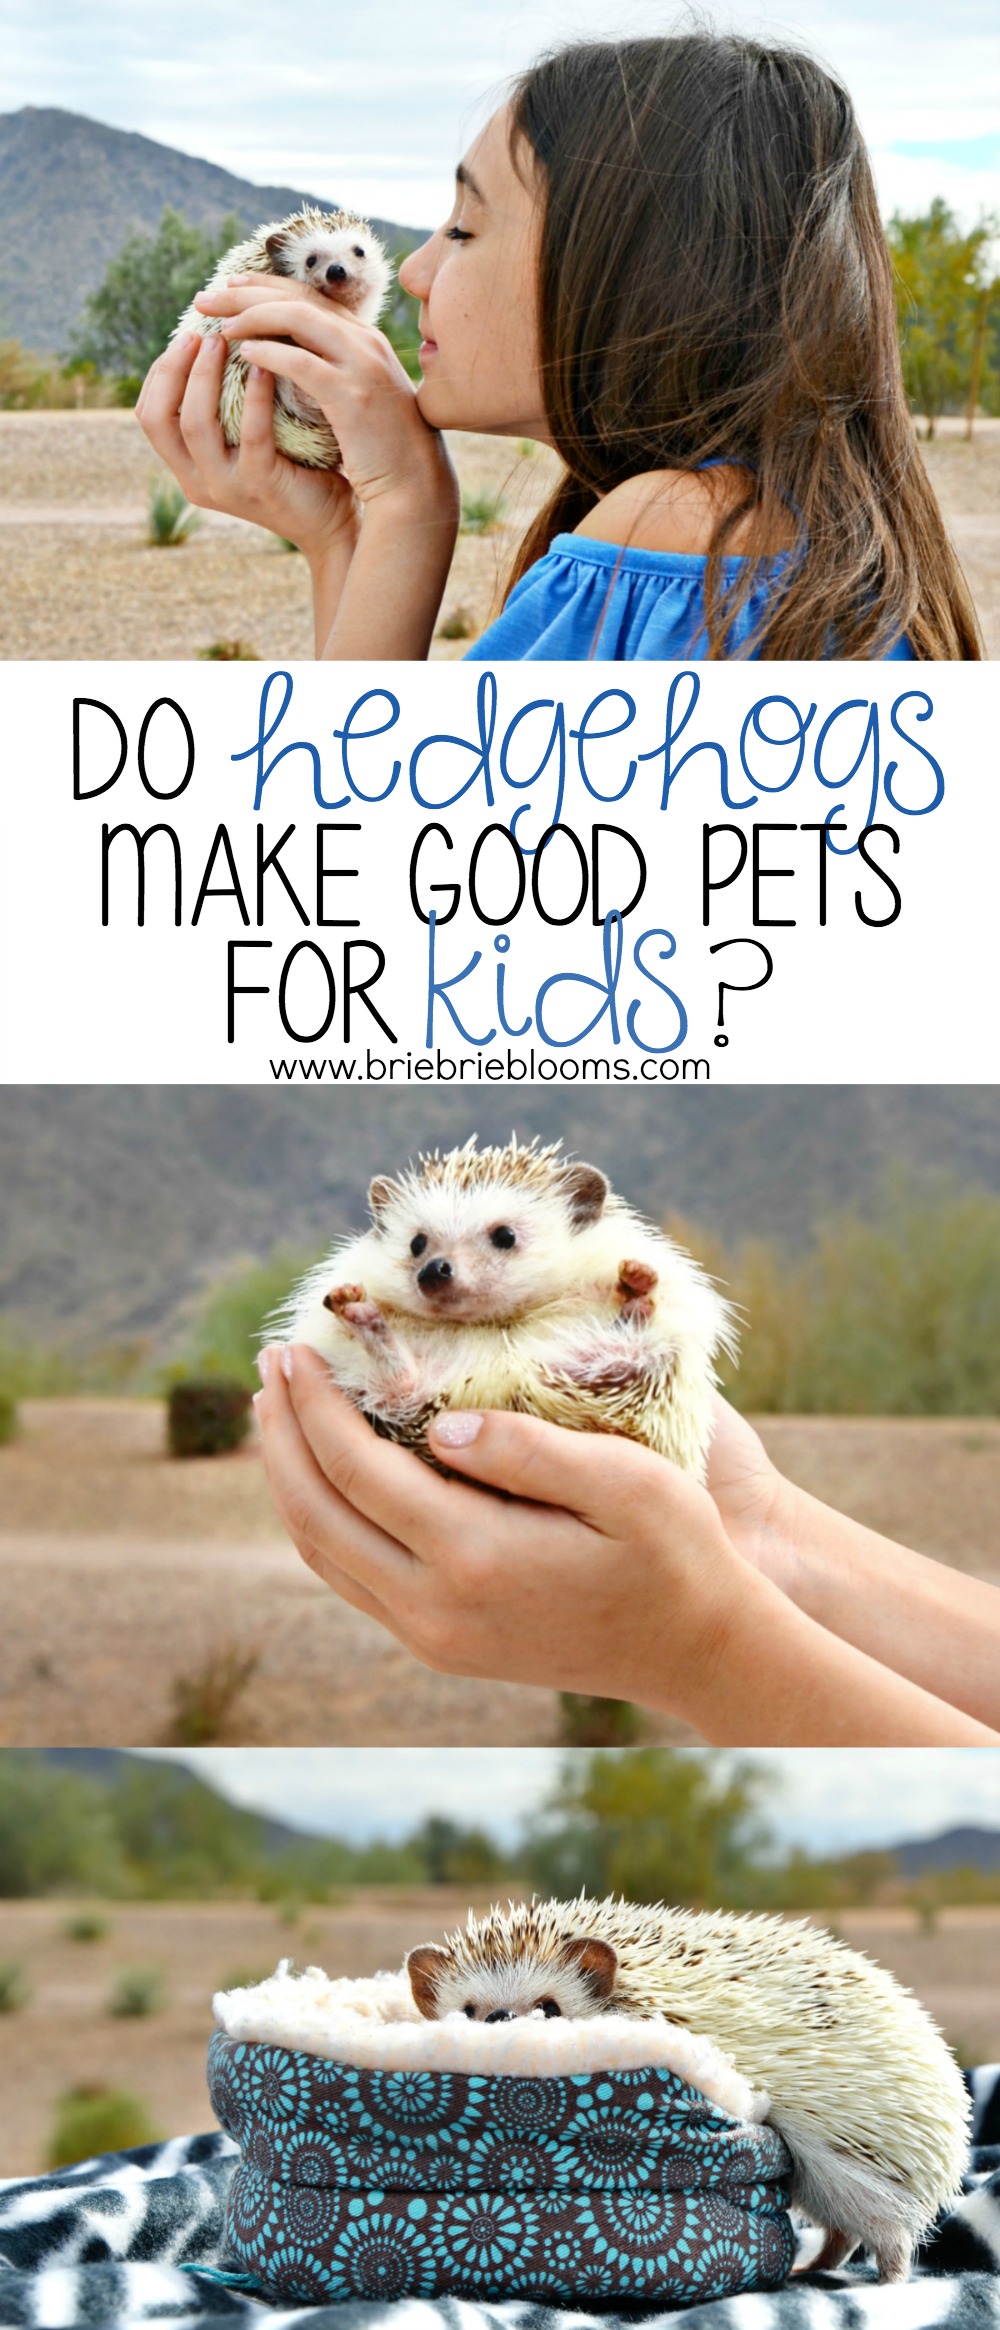 Do hedgehogs make good pets for kids? Every pet and owner relationship has it's pros and cons. Read what we've learned by our child having a pet hedgehog.